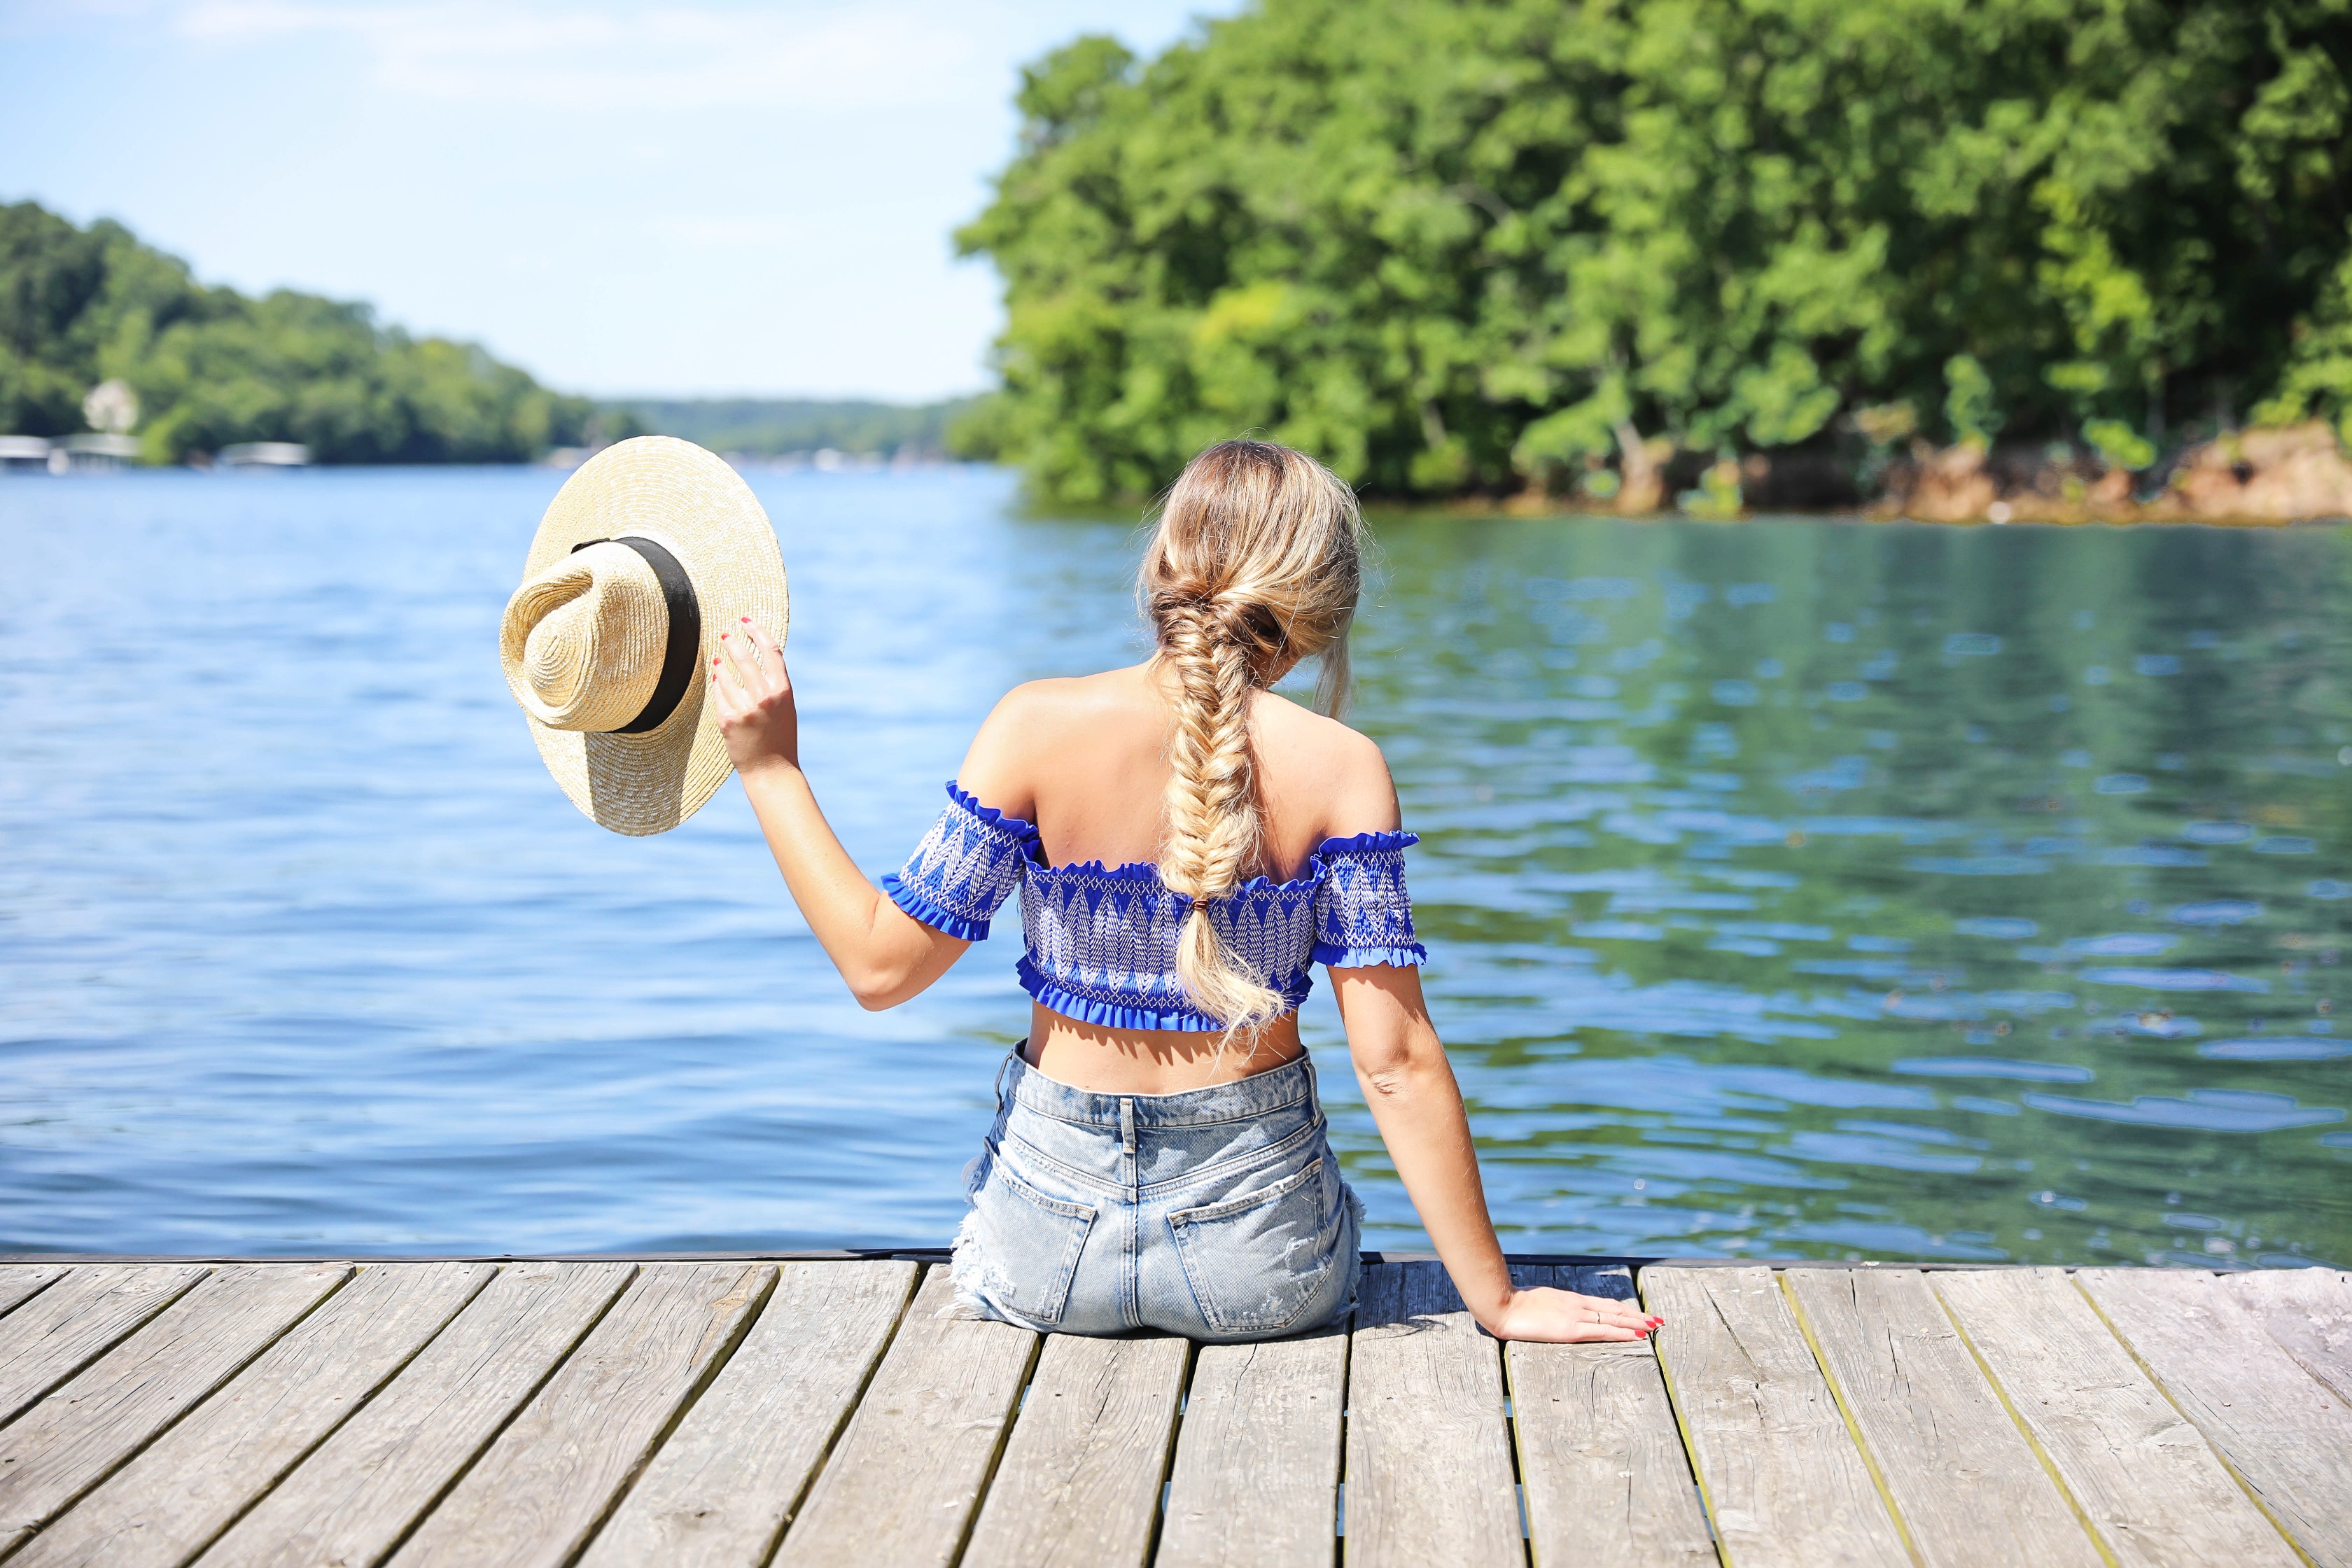 Hair care routine for summer! Royal blue Ted Baker London Smocked Bardot Bikini Top! I love this off the shoulder swimsuit, plus the colors is adorable! Paired with jean shorts at the lake! Perfect summer outfit! Details on fashion blog daily dose of charm by lauren lindmark